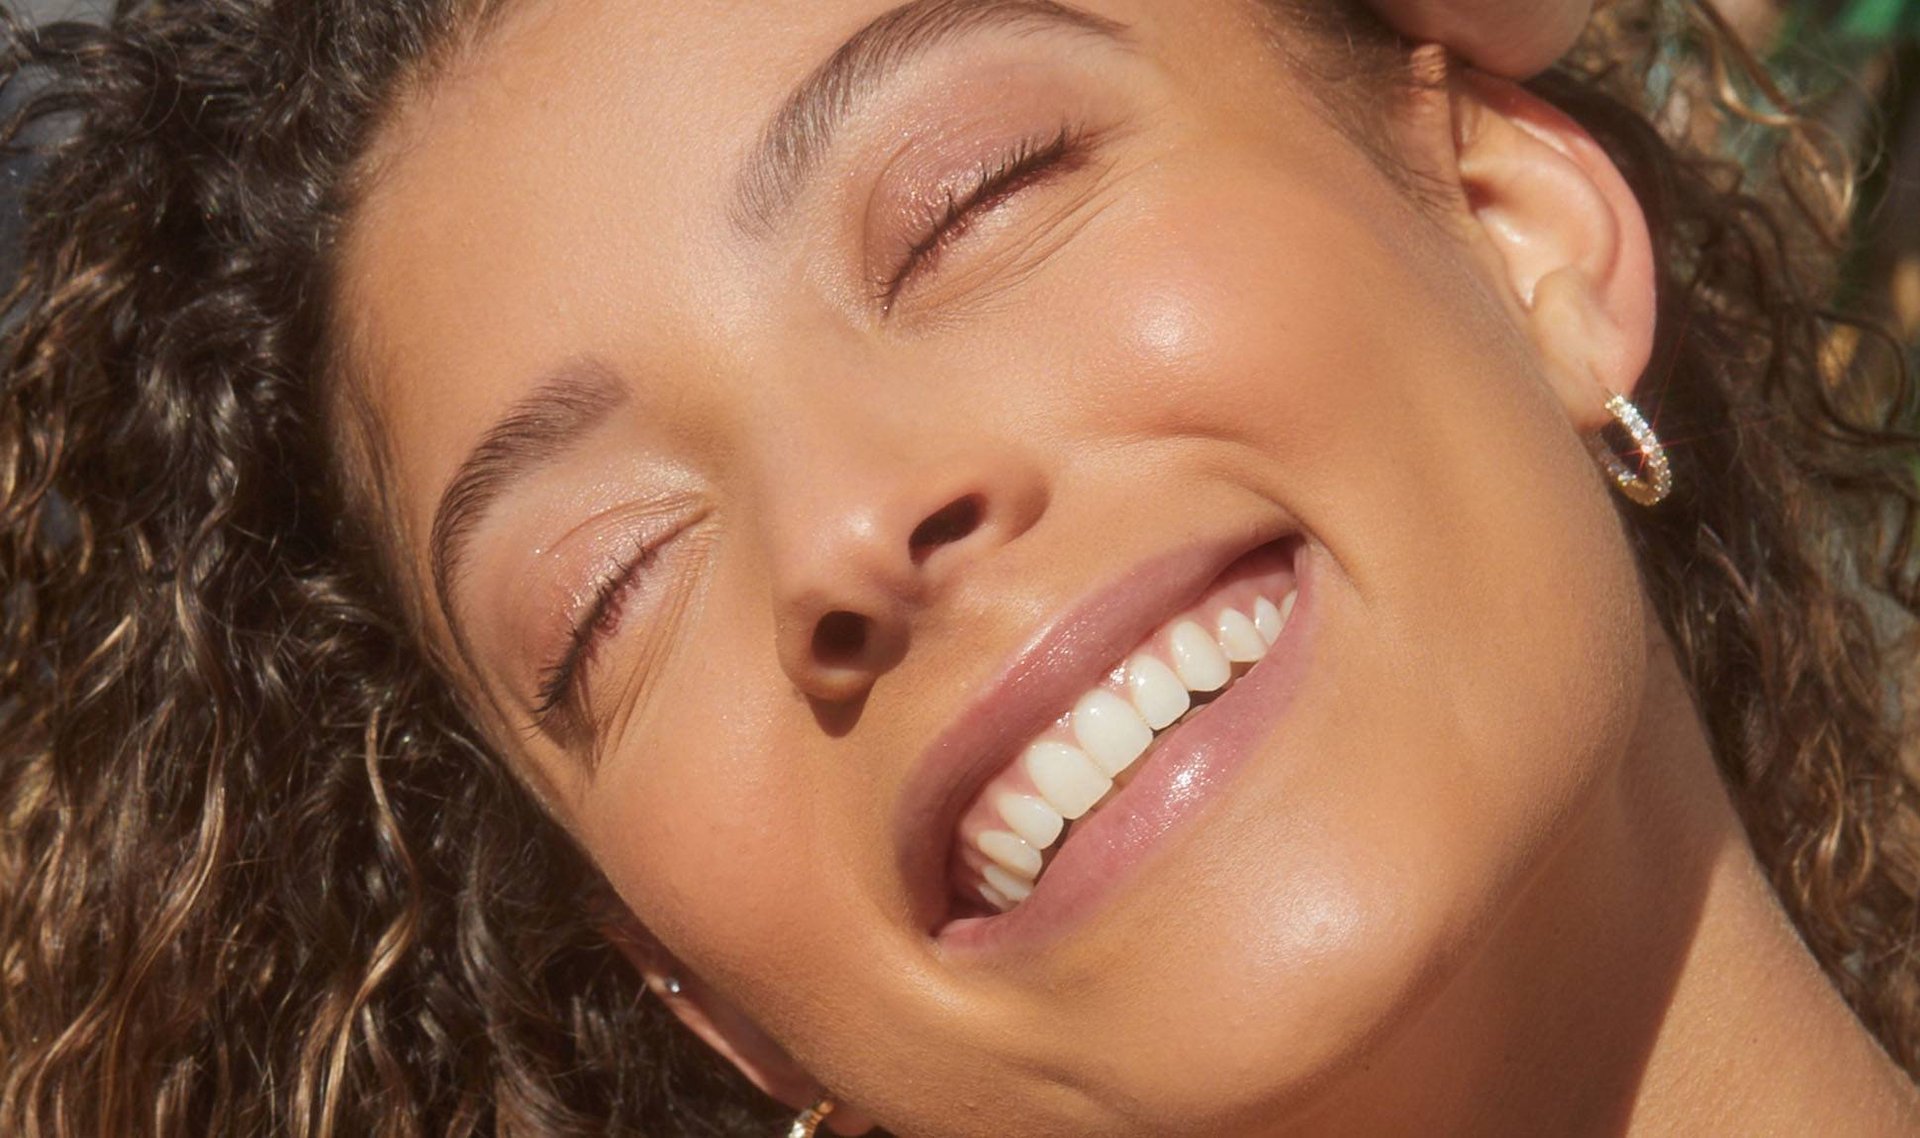 5 Tips to Make Your Glowy Skin Goals Totally Achievable